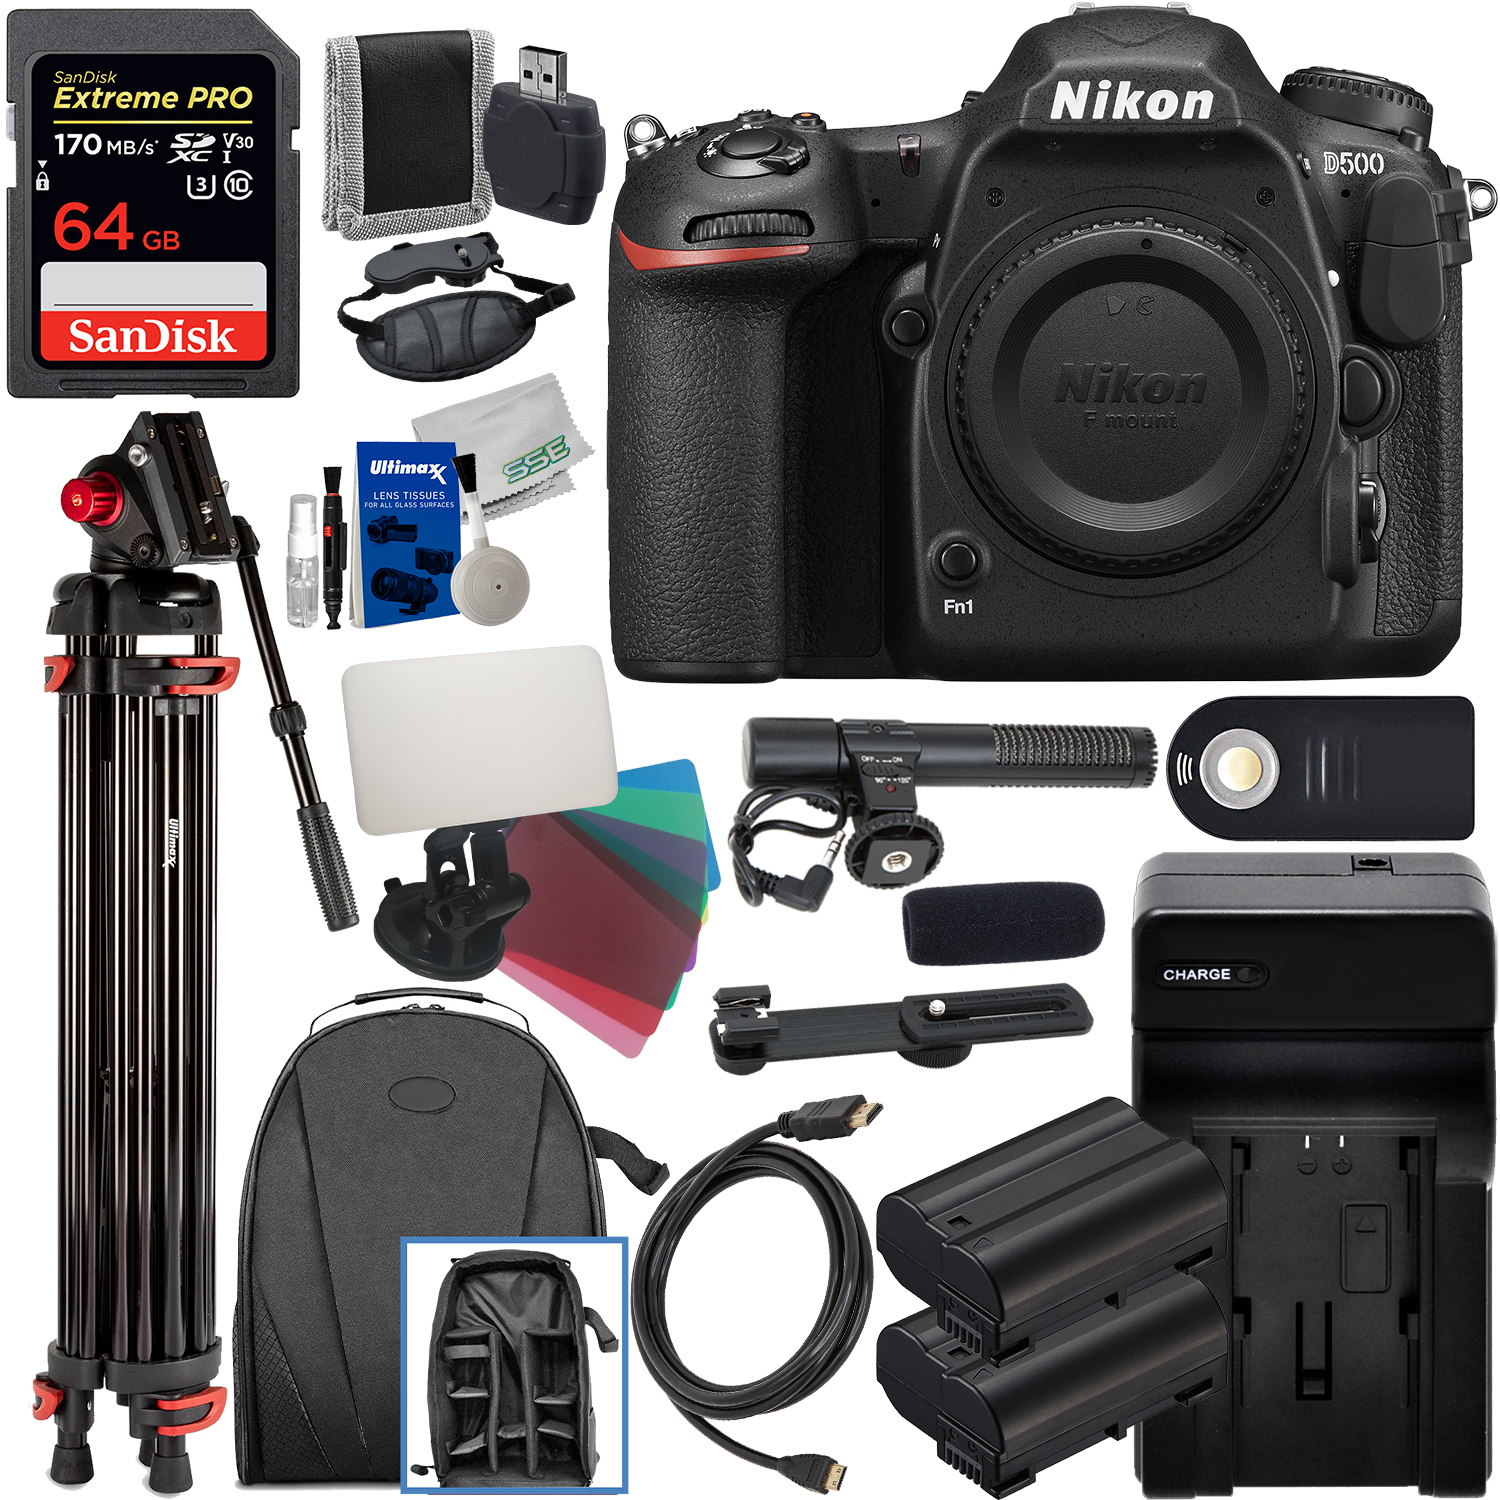 Nikon D500 DSLR Camera (Body Only) with Essential Accessory Bundle - Includes: SanDisk Extreme PRO 64GB SDXC, Heavy Duty 72â? Tripod, 2x Replacement Batteries, Water Resistant Backpack & Much More